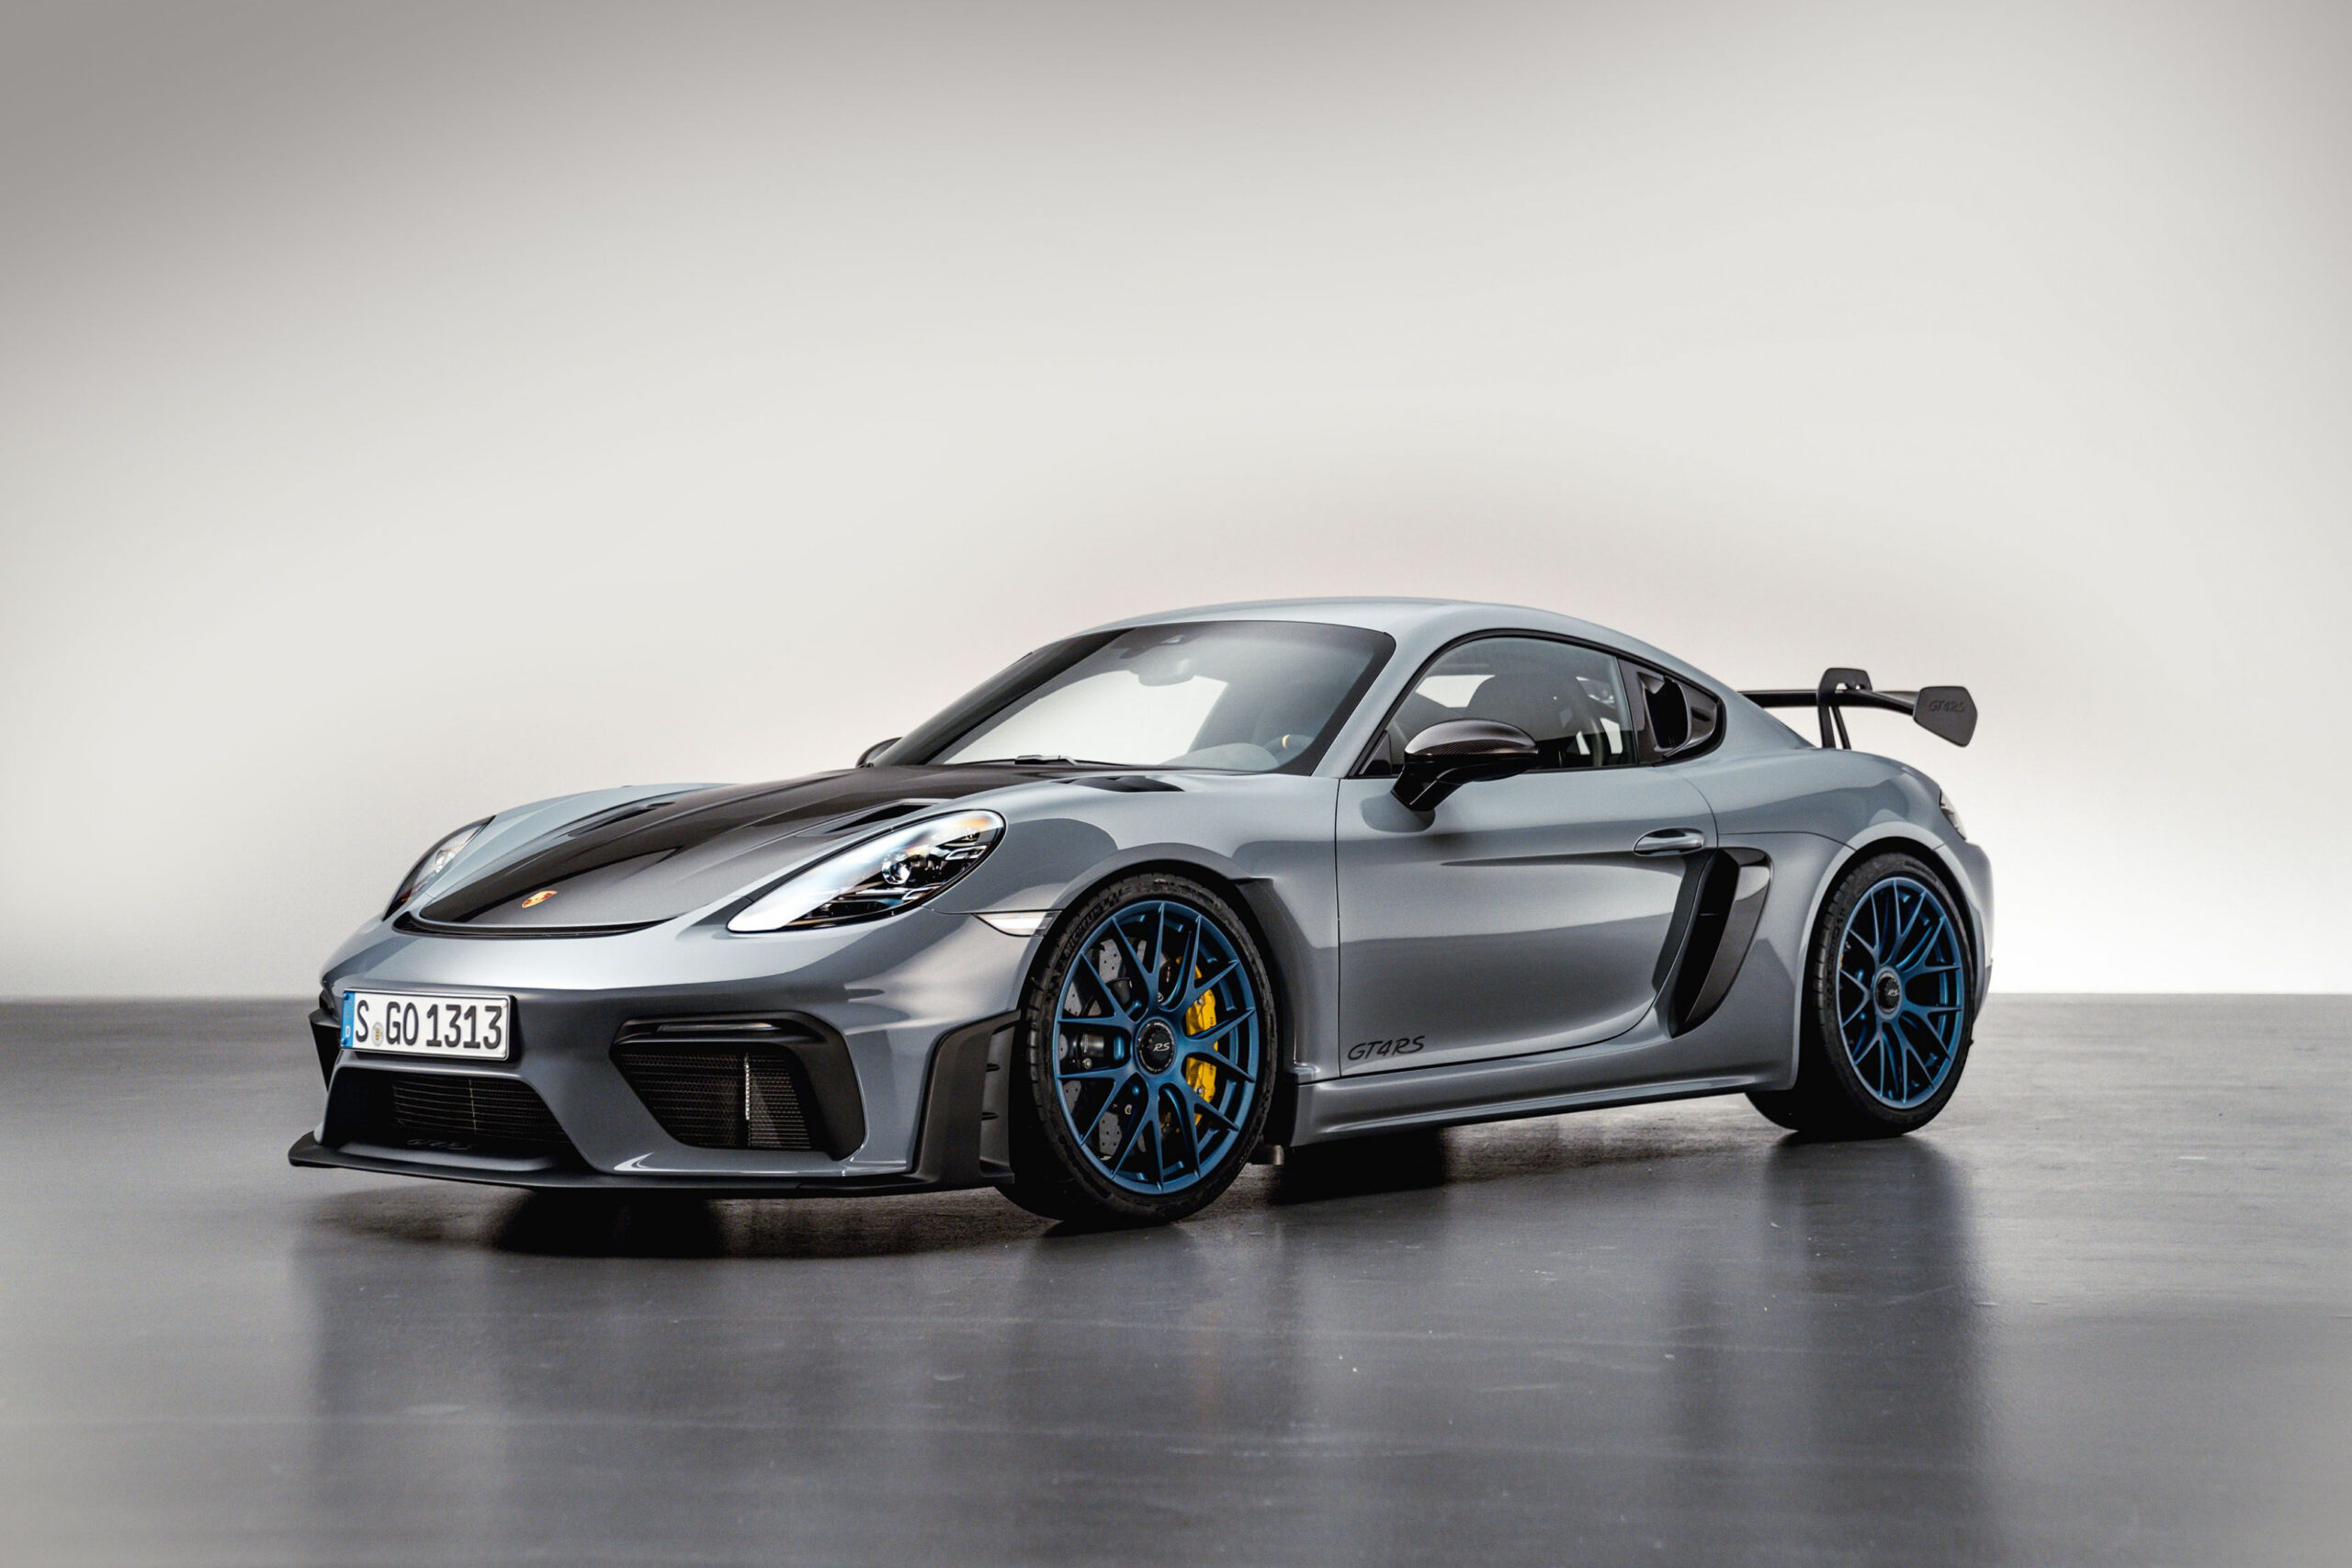 4 Porsche 4 Cayman Gt4 Rs: Everything You Need To Know Porsche 718 Gt4 Rs